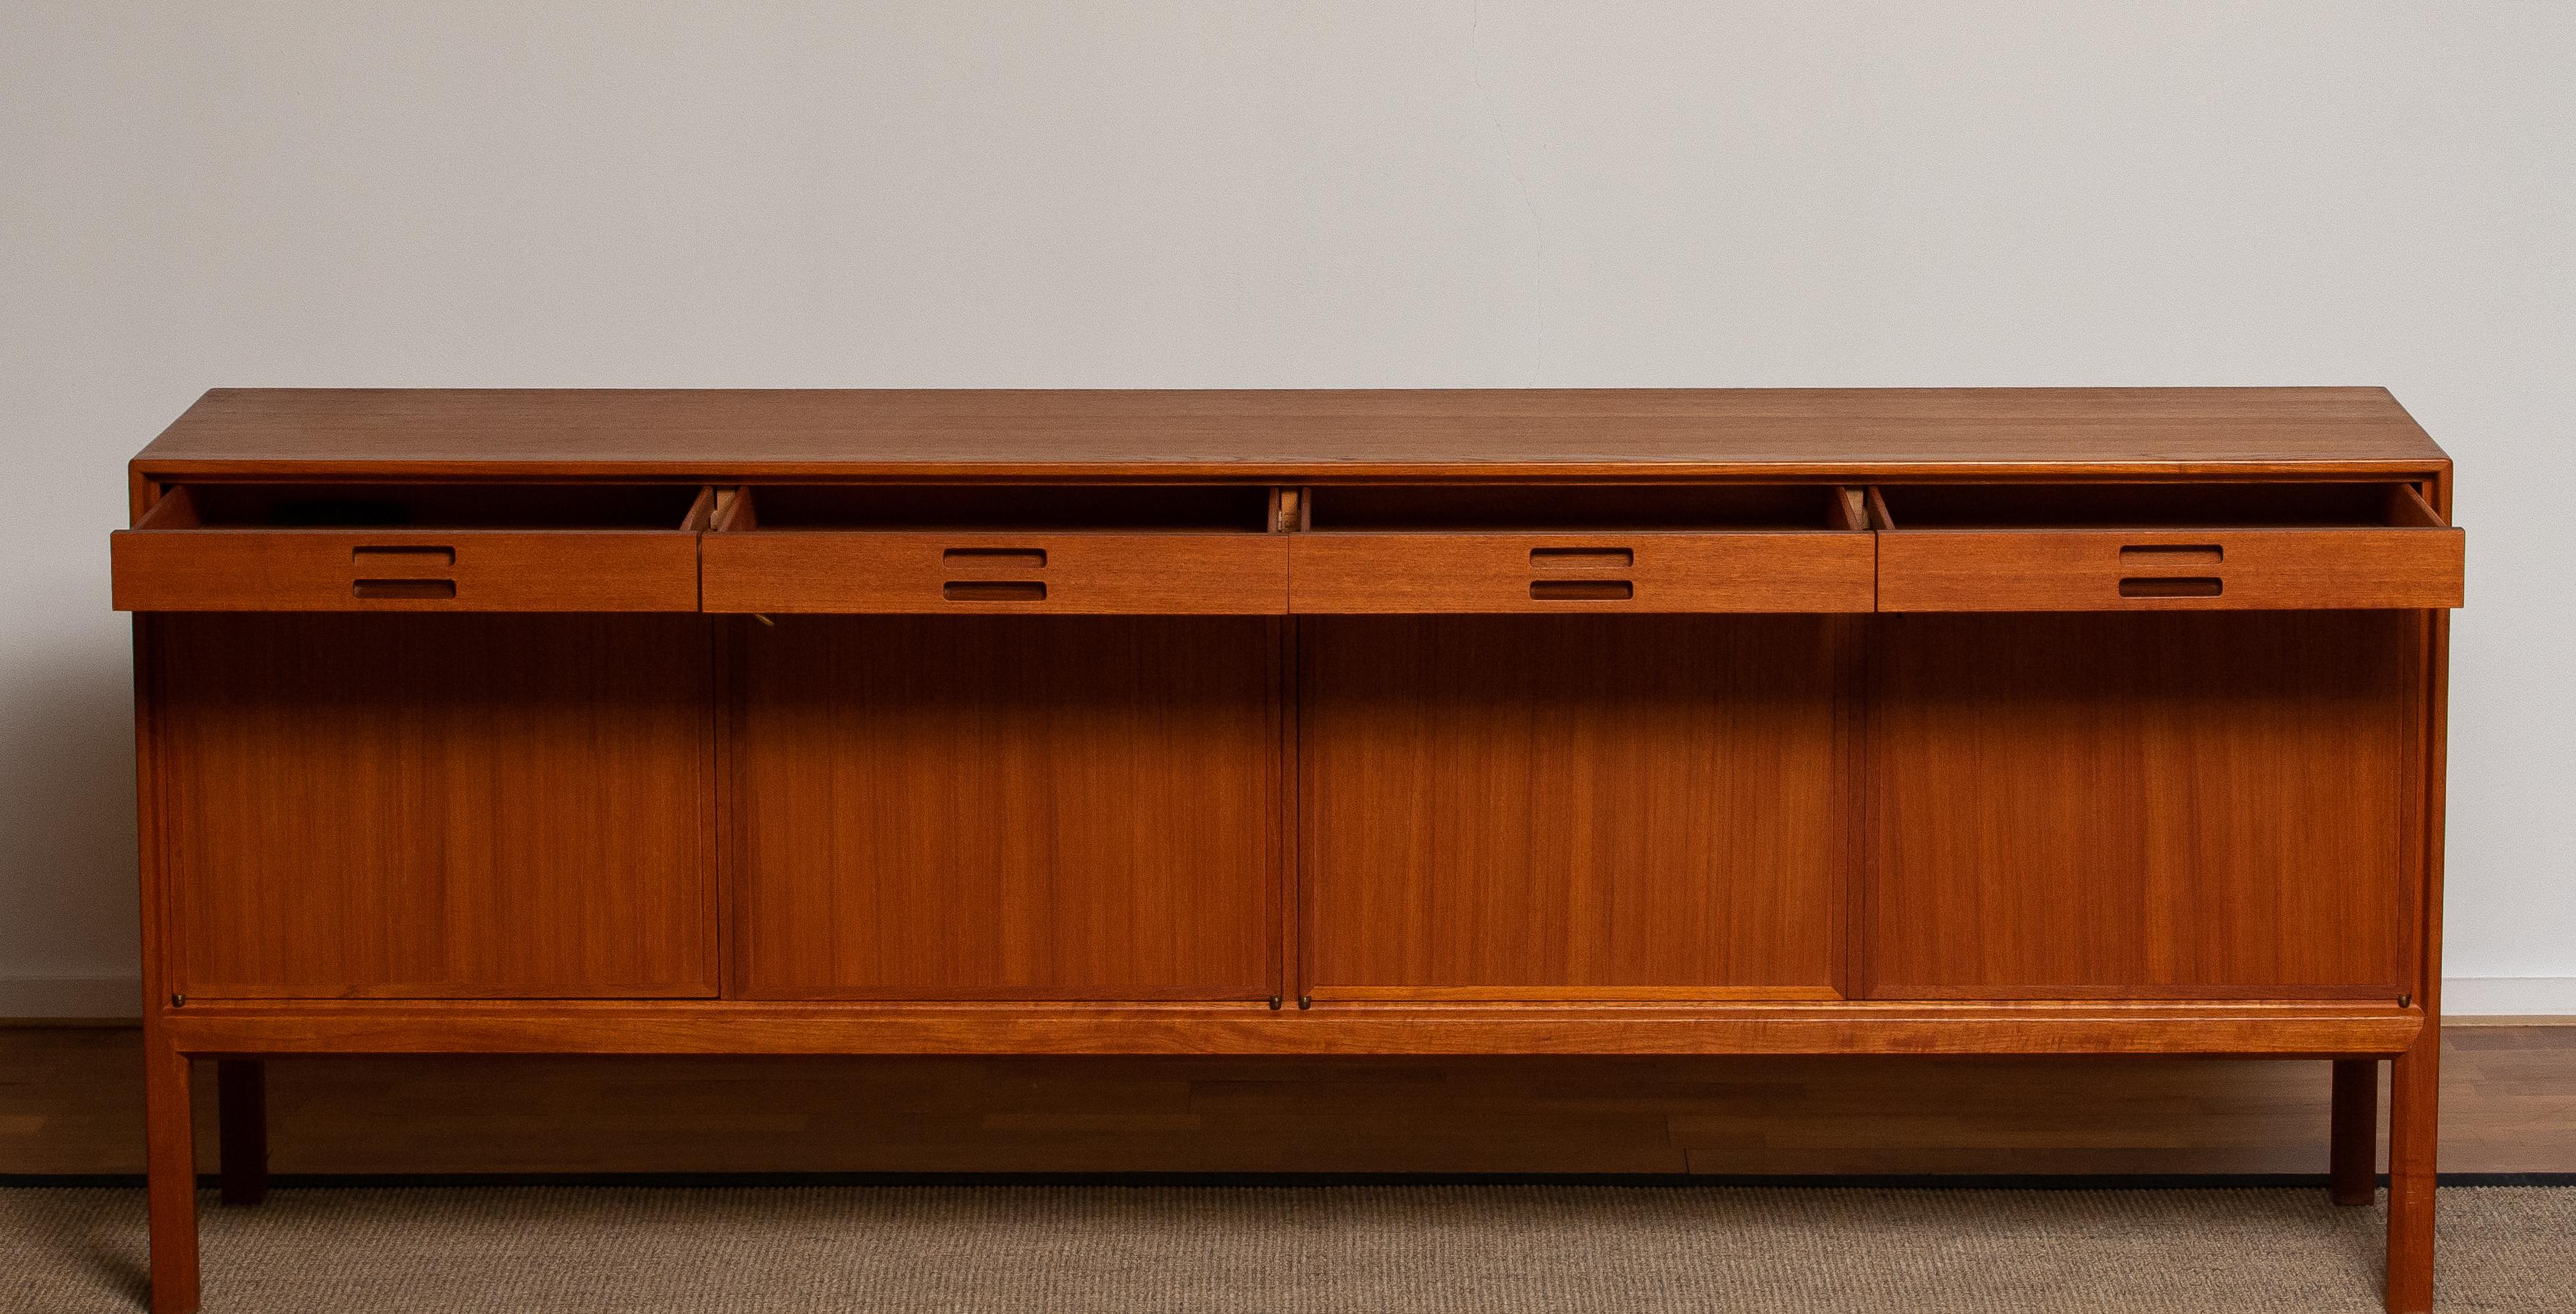 Two identical beautiful sideboards or credenzas designed by Bertil Fridhagen for Bodafors Bra Bohag from Sweden. These two identical sideboards are both made of teak.
Both are in excellent condition. Period 1950s.
Additional photos, Sure. Just let